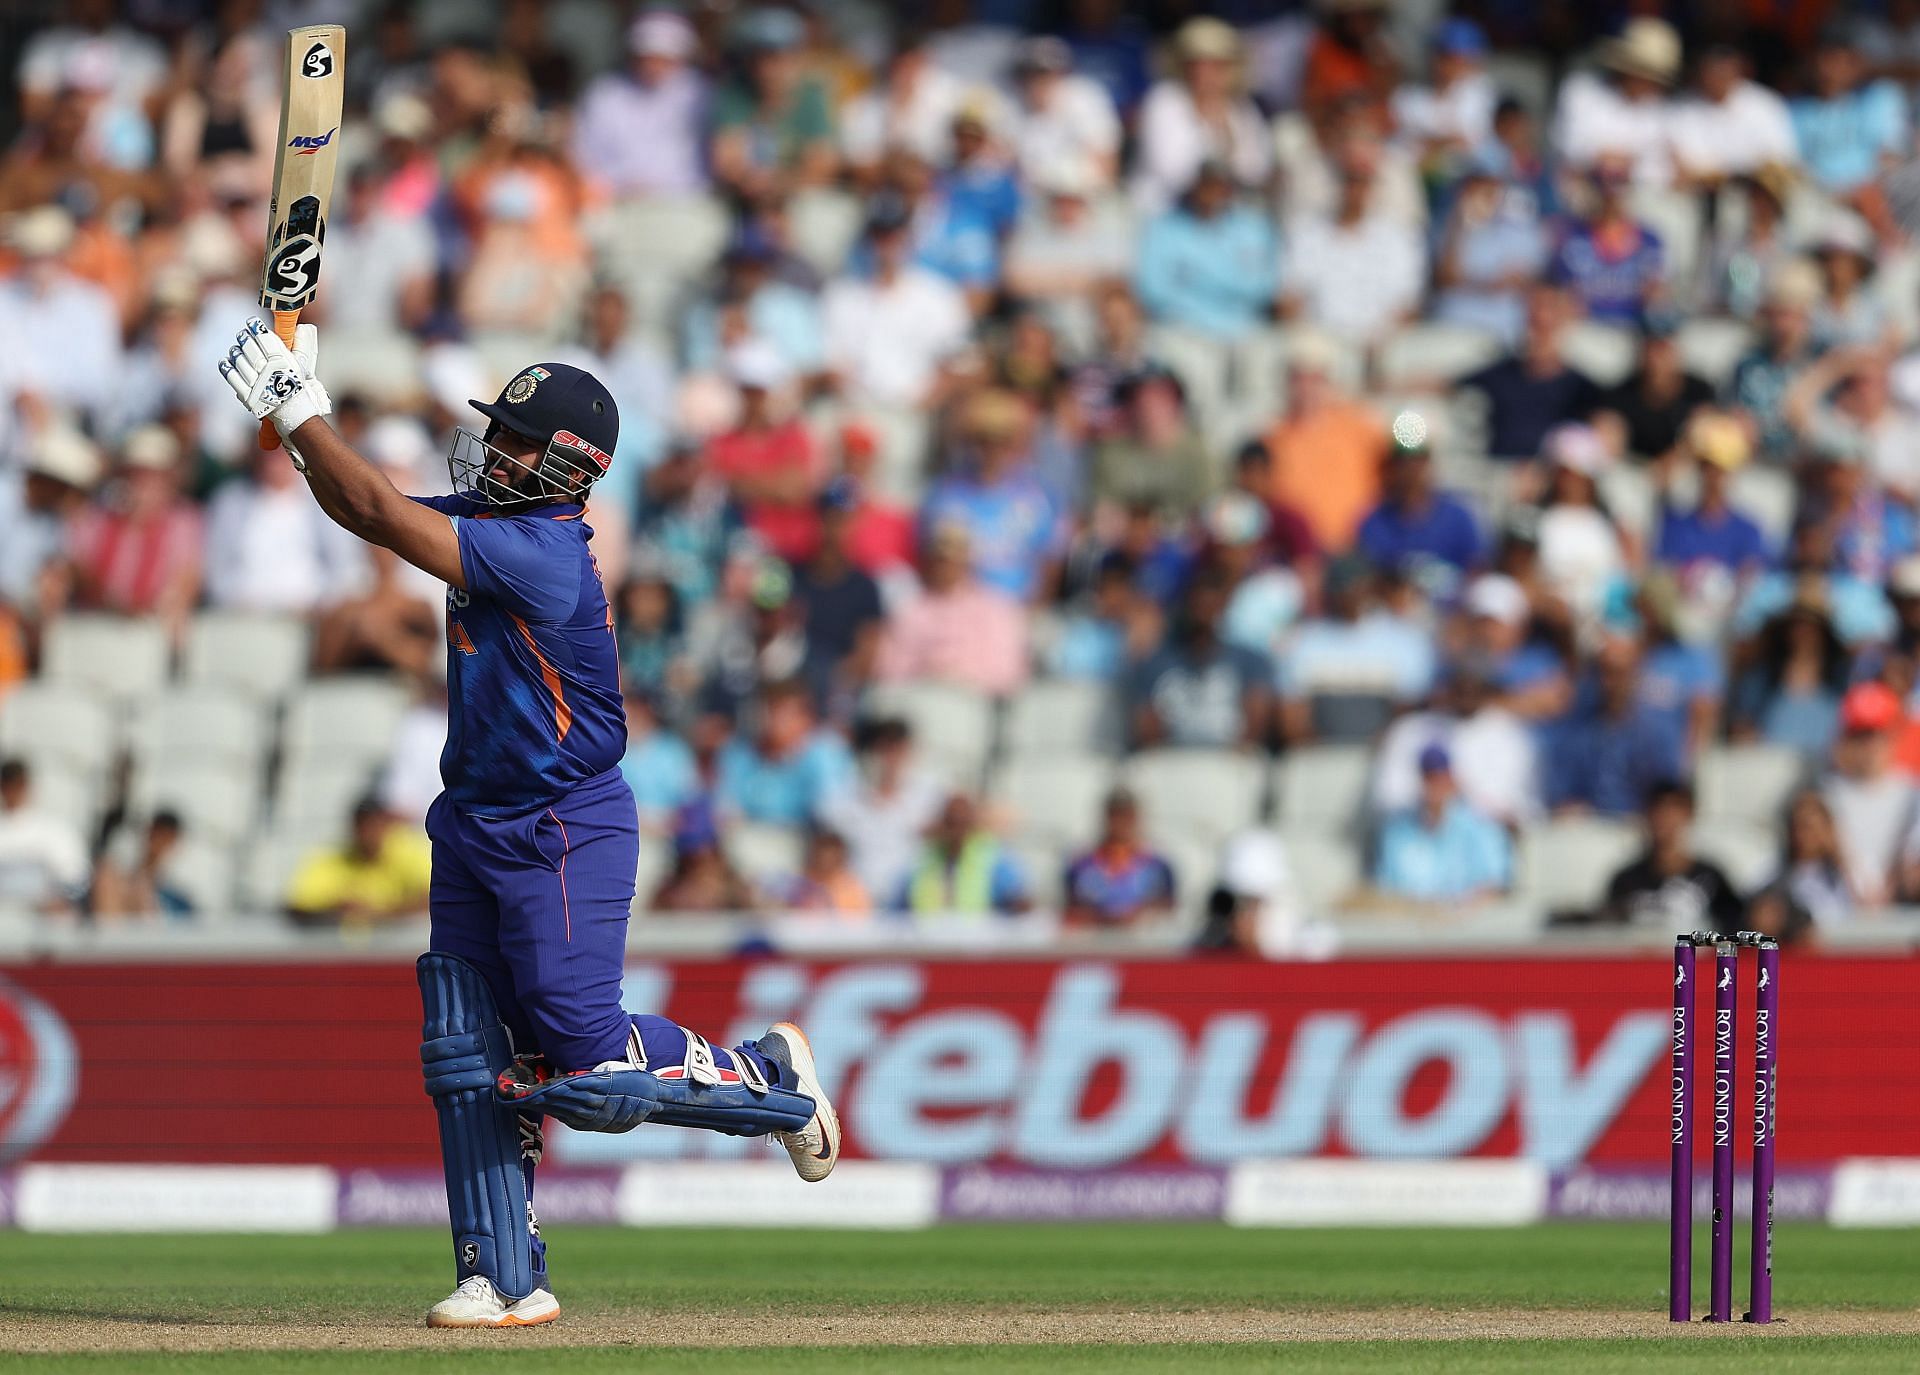 Rishabh Pant smoked 21 runs in the 42nd over bowled by David Willey